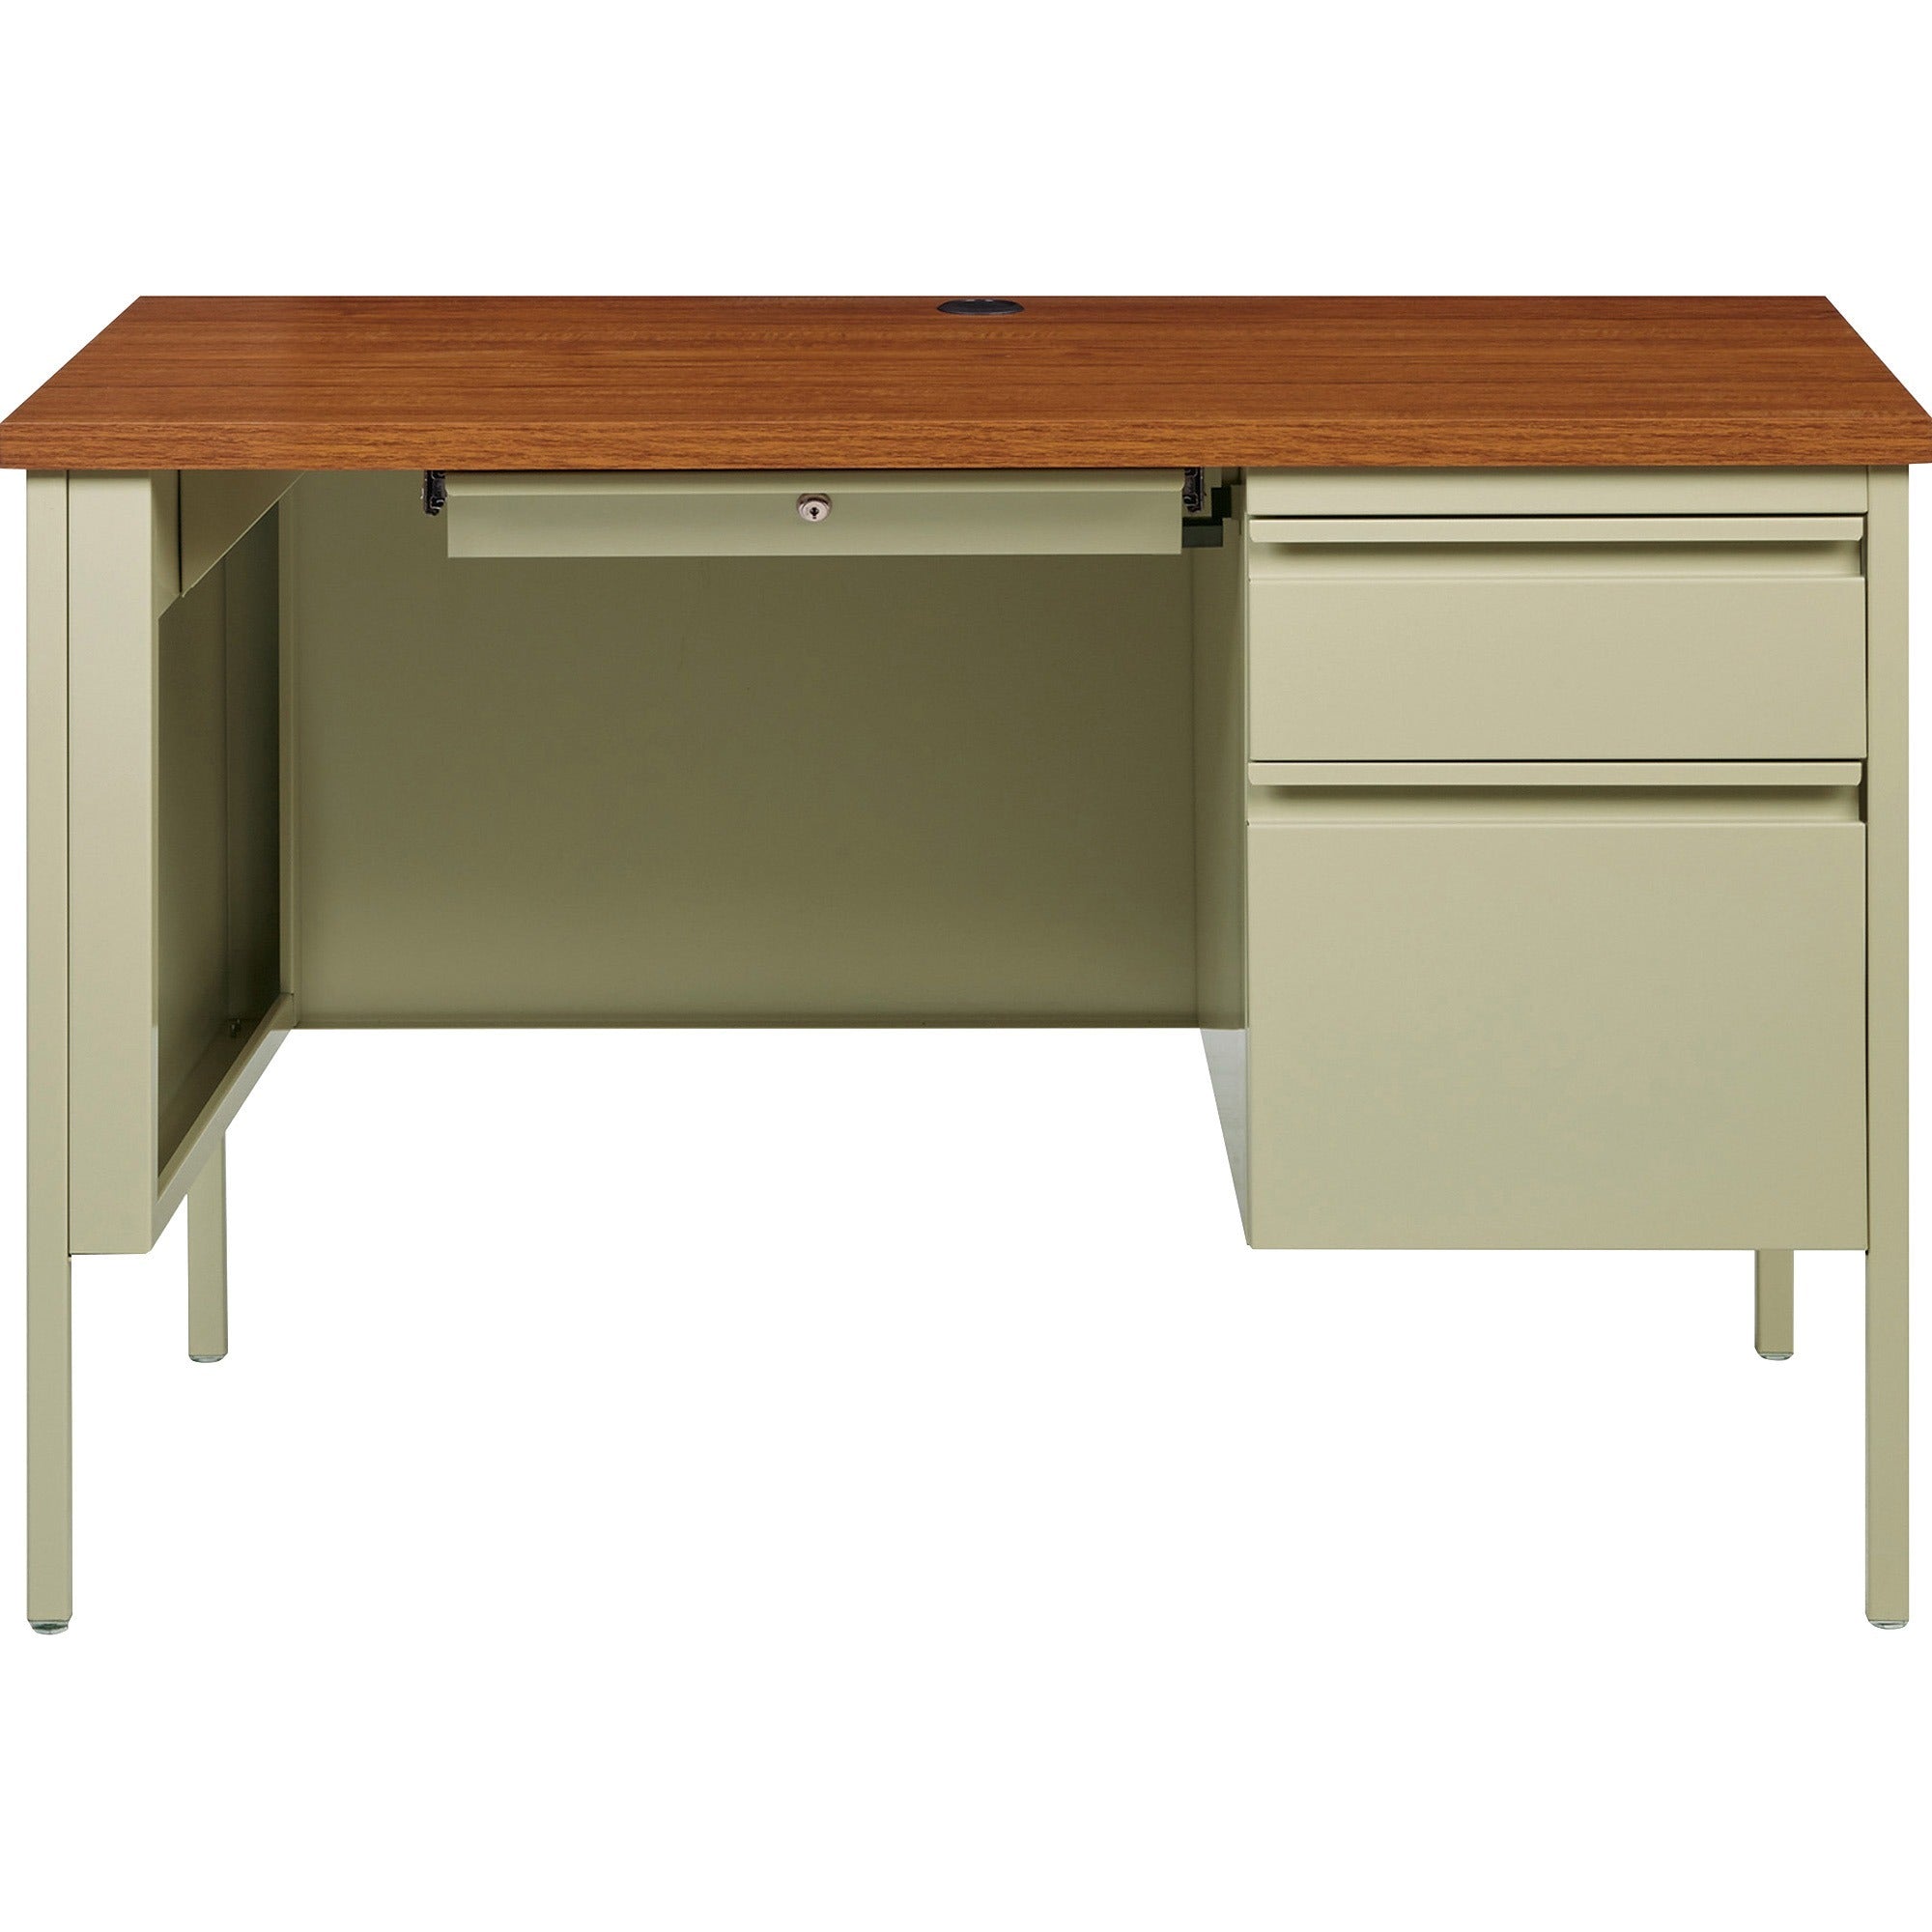 lorell-fortress-series-45-1-2-right-single-pedestal-desk-455-x-24295--11-table-top-box-file-drawers-single-pedestal-on-right-side-square-edge_llr66947 - 2